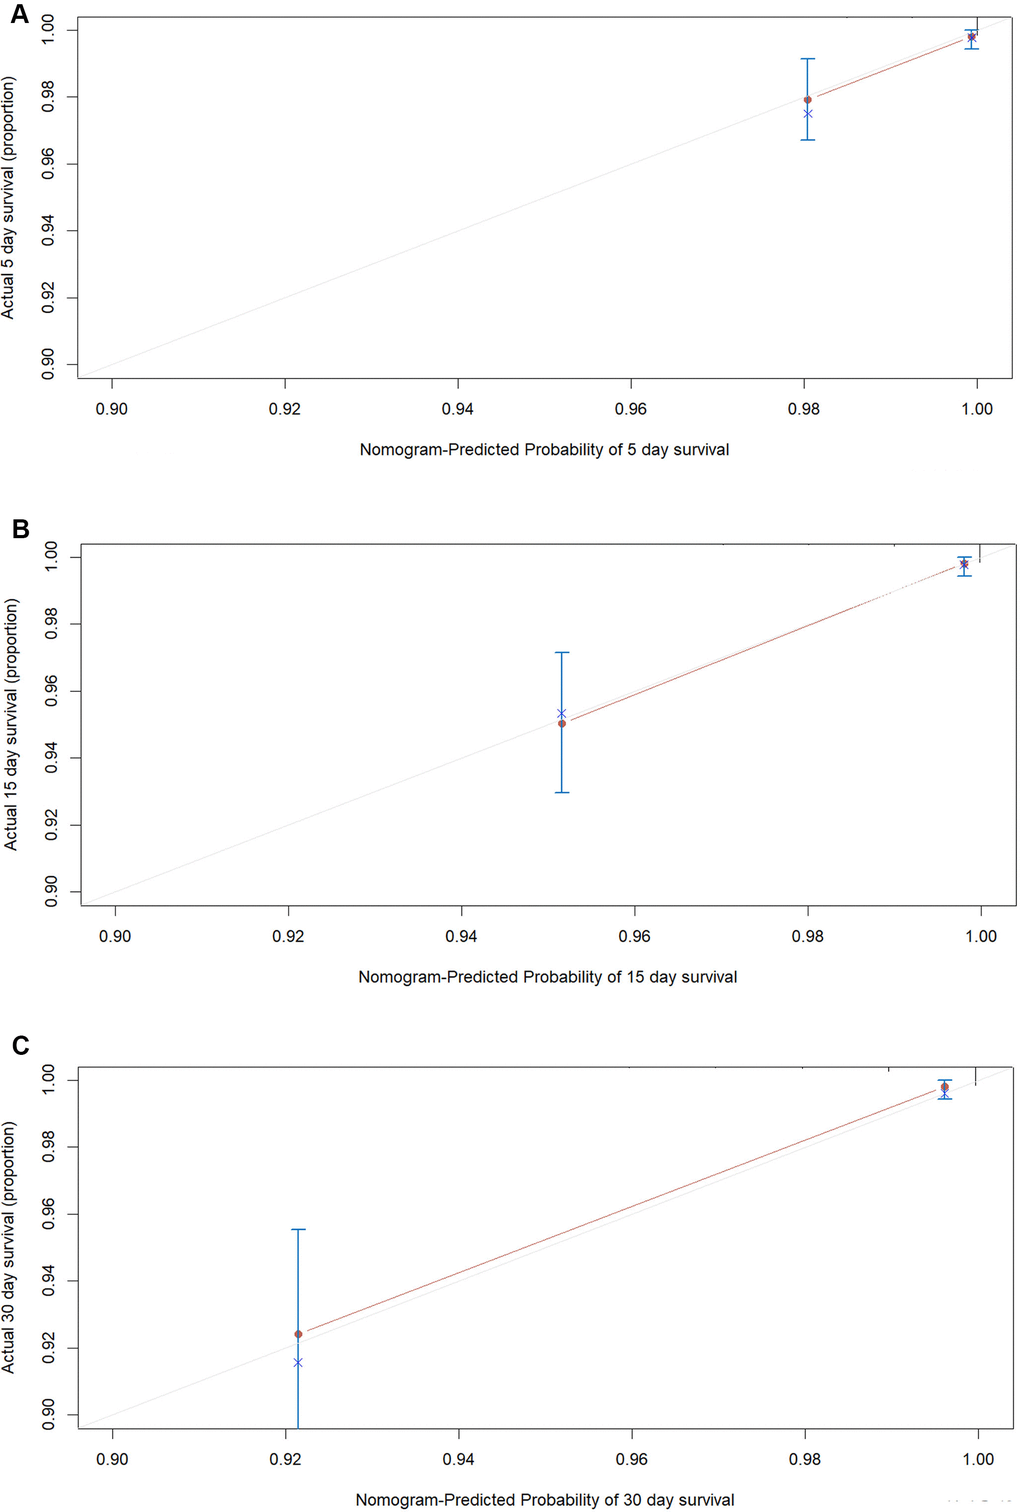 The calibration plots for the probability of in-hospital mortality of COVID-19 in external validation cohort. Calibration plots of the nomogram predict (A) 5-day, (B) 15-day and (C) 30-day in-hospital mortality in COVID-19 patients in the validation cohort. Nomogram-predicted probability of in-hospital mortality is plotted on the x-axis; actual in-hospital mortality is plotted on the y-axis.